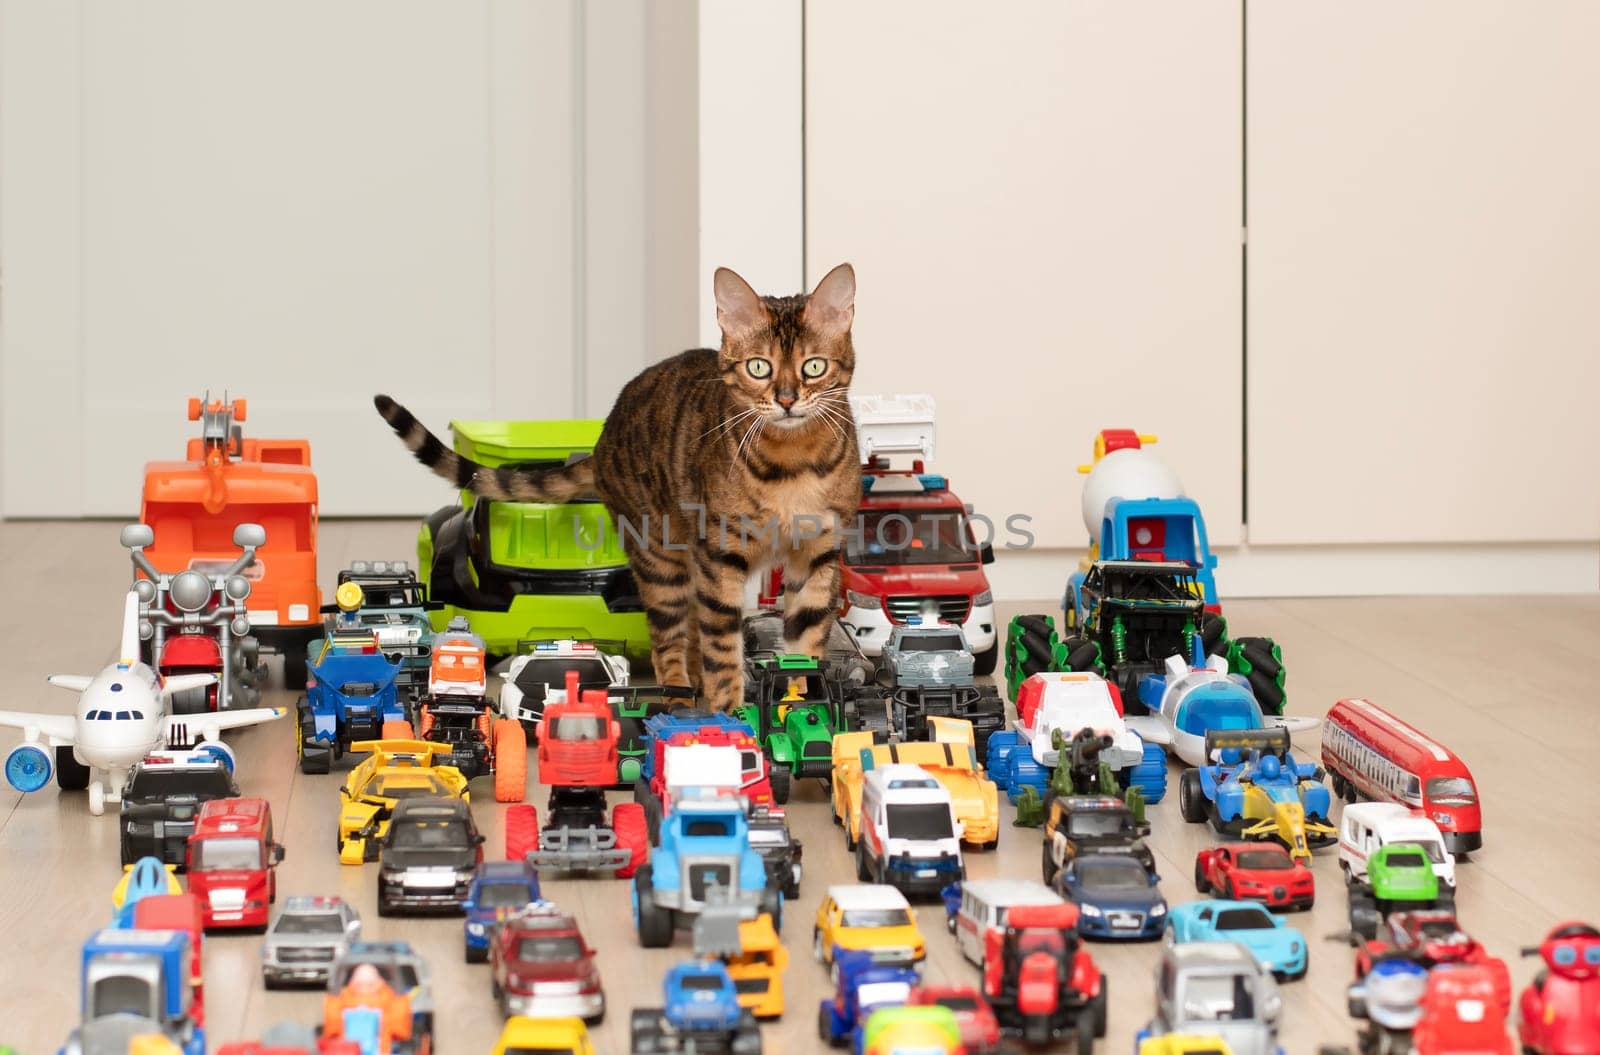 Concept of children's toys. A domestic beautiful, red and tabby Bengal cat walks on the floor, among colorful small and large toy cars in the children's room. Soft focus.